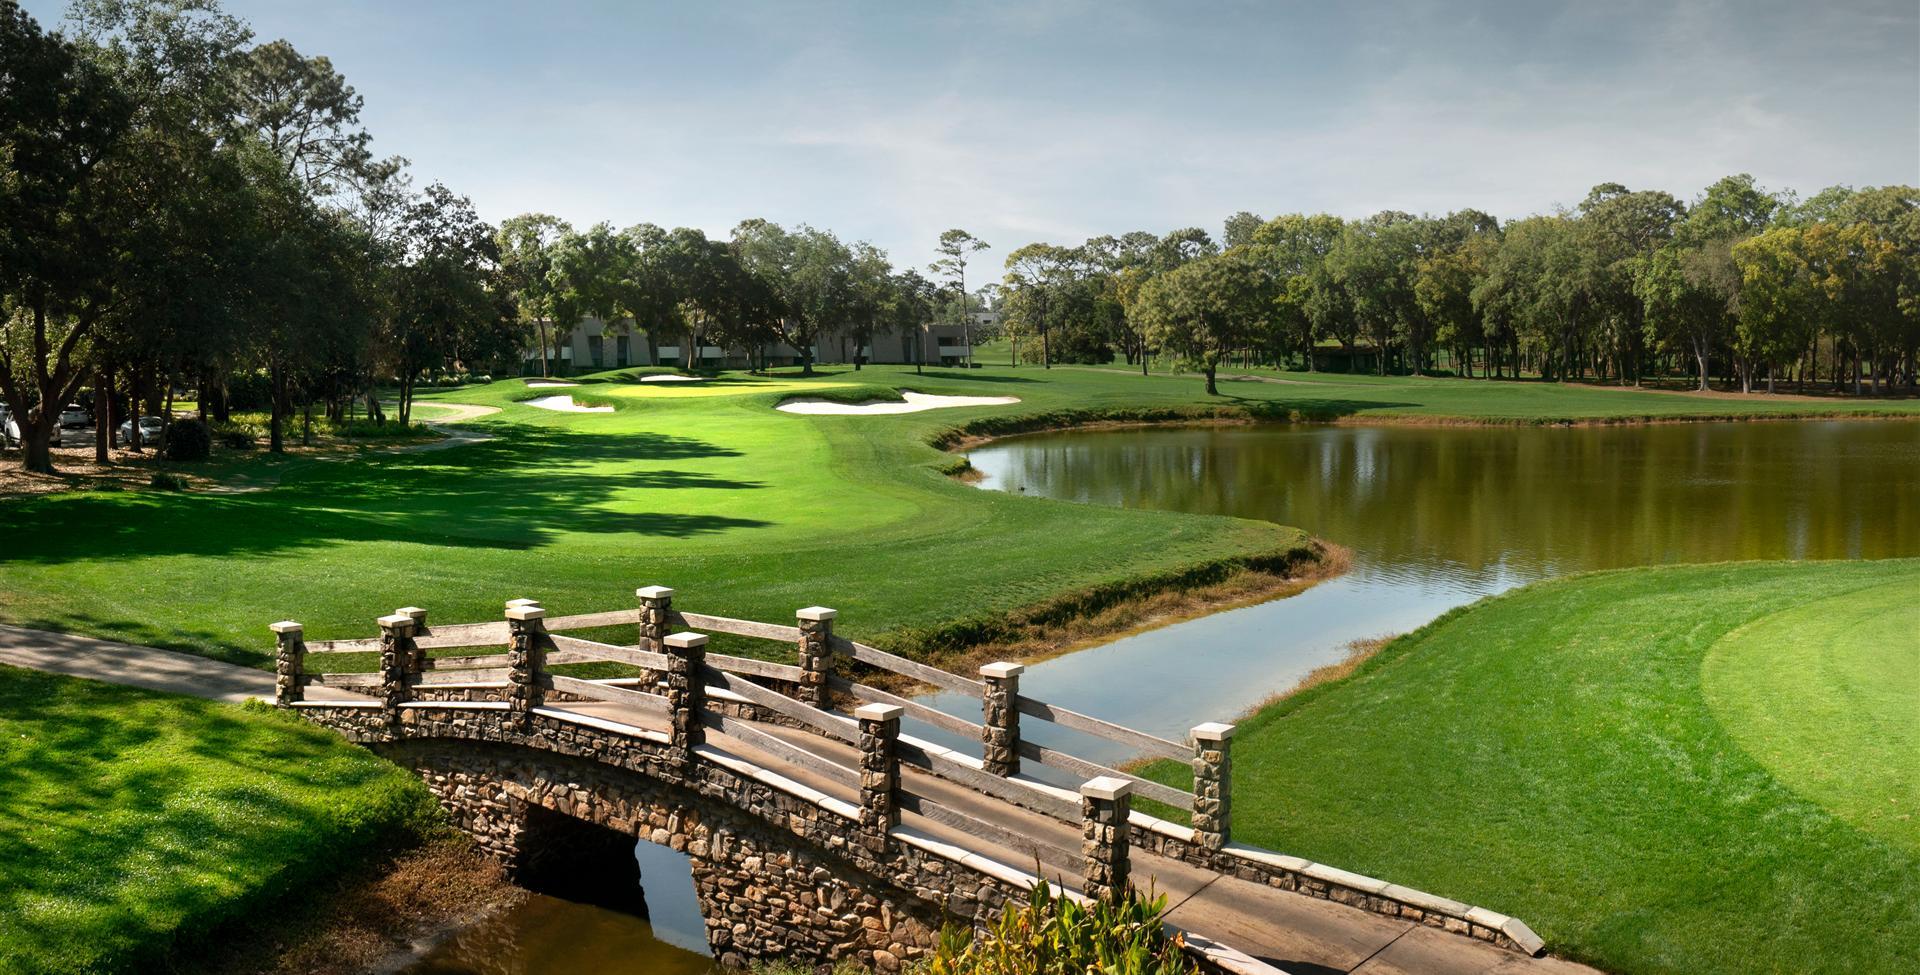 A river running through the golf course with a bridge going over it